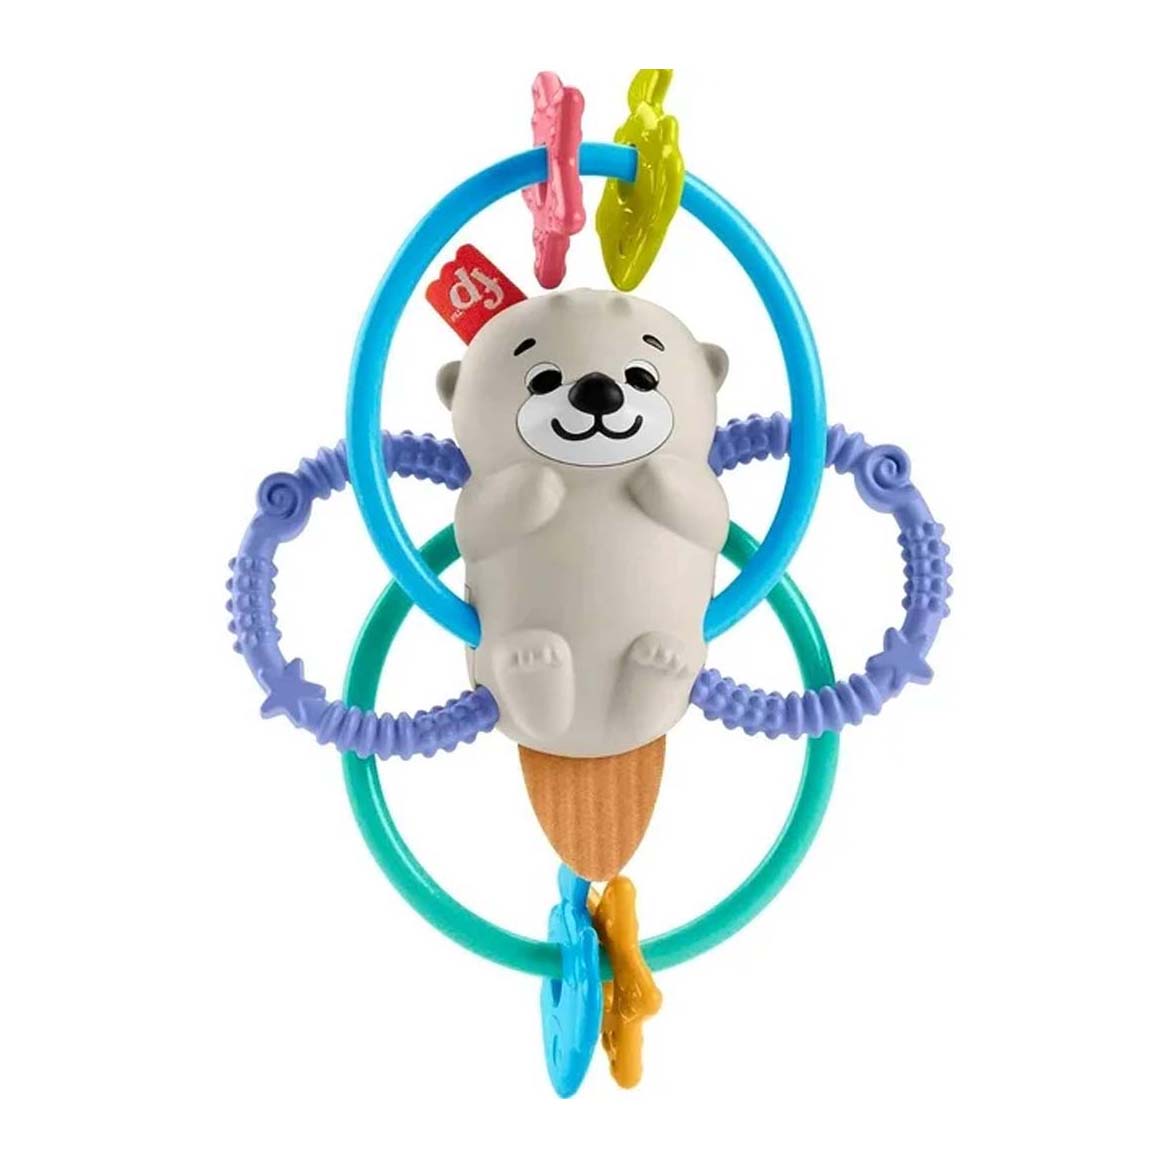 Baby Otter Rattle Toy for teething with a number of colorful rings